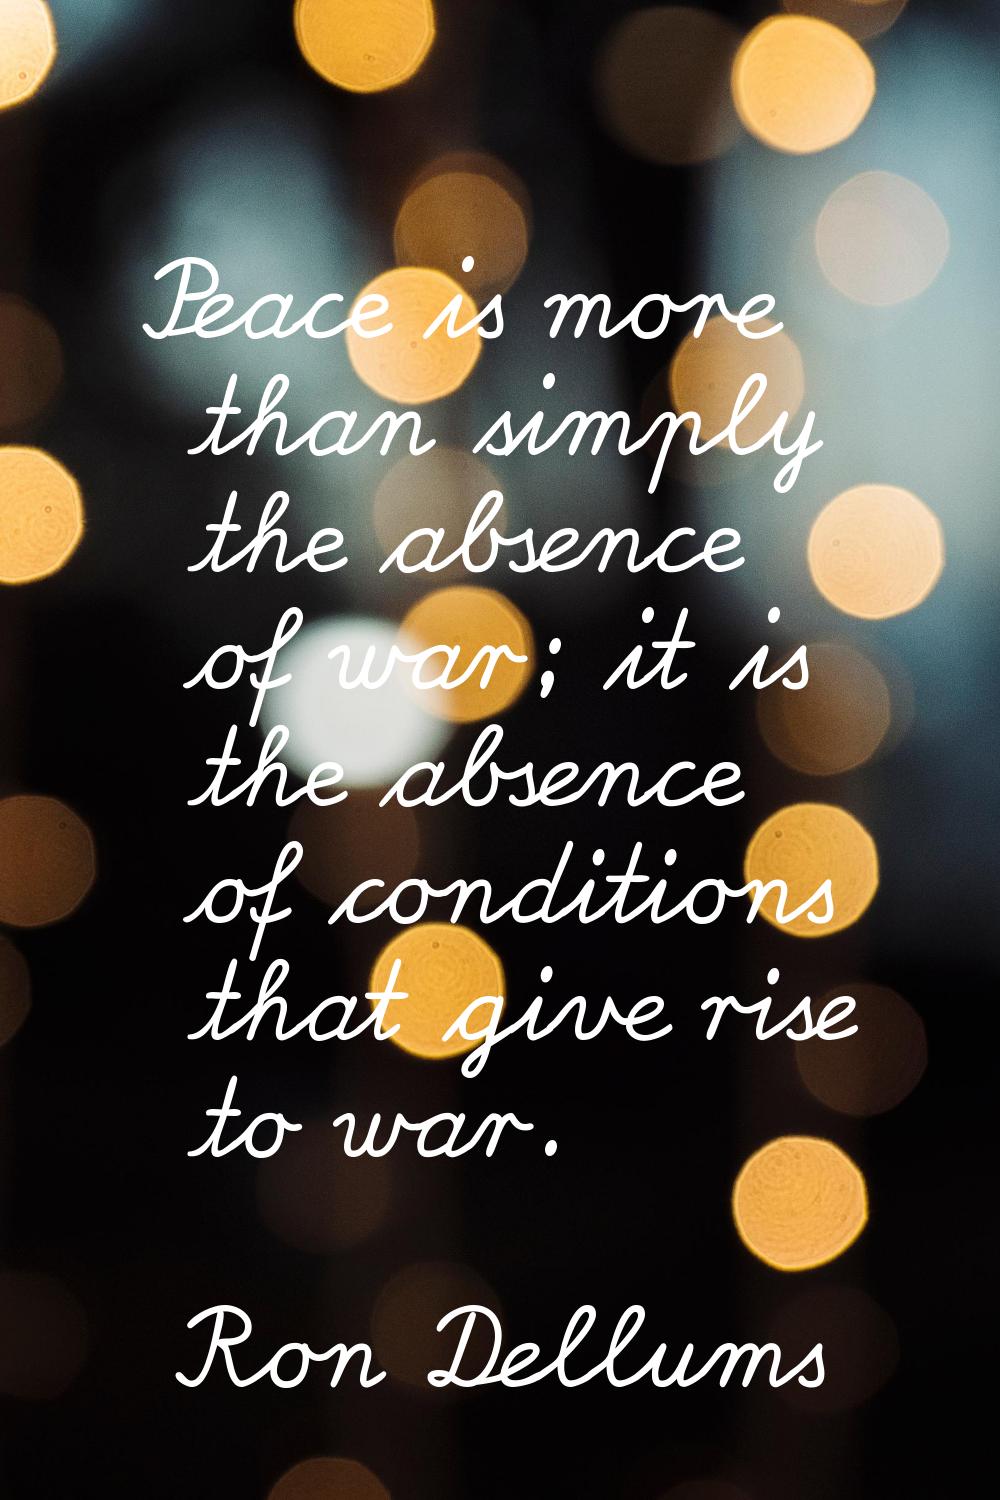 Peace is more than simply the absence of war; it is the absence of conditions that give rise to war